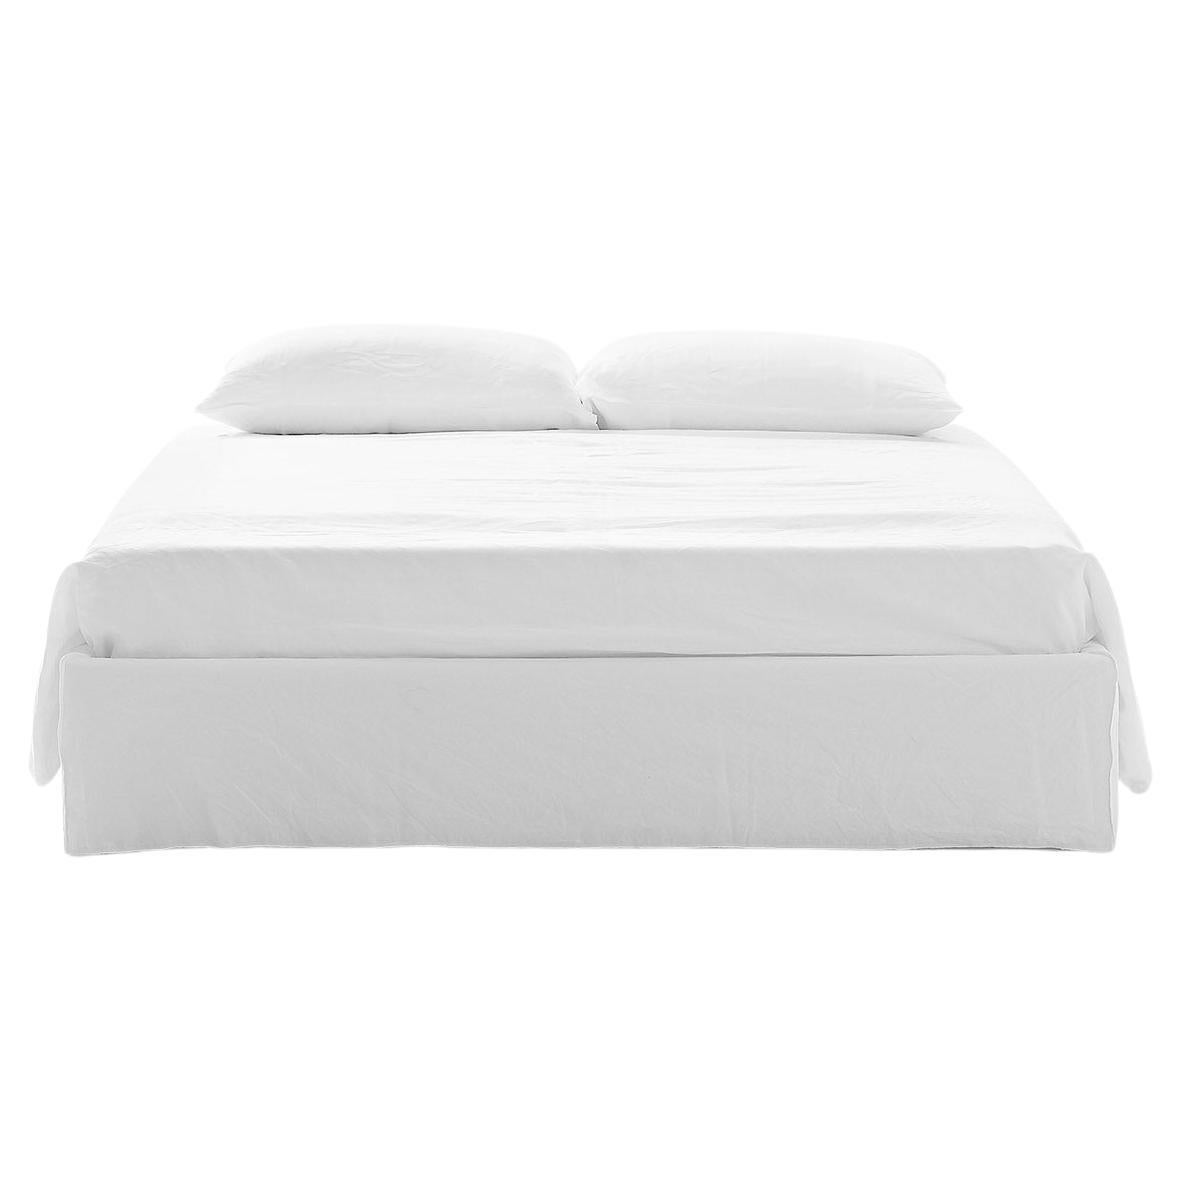 Gervasoni Ghost 80 Queen L Bed in White Linen Upholstery, Paola Navone